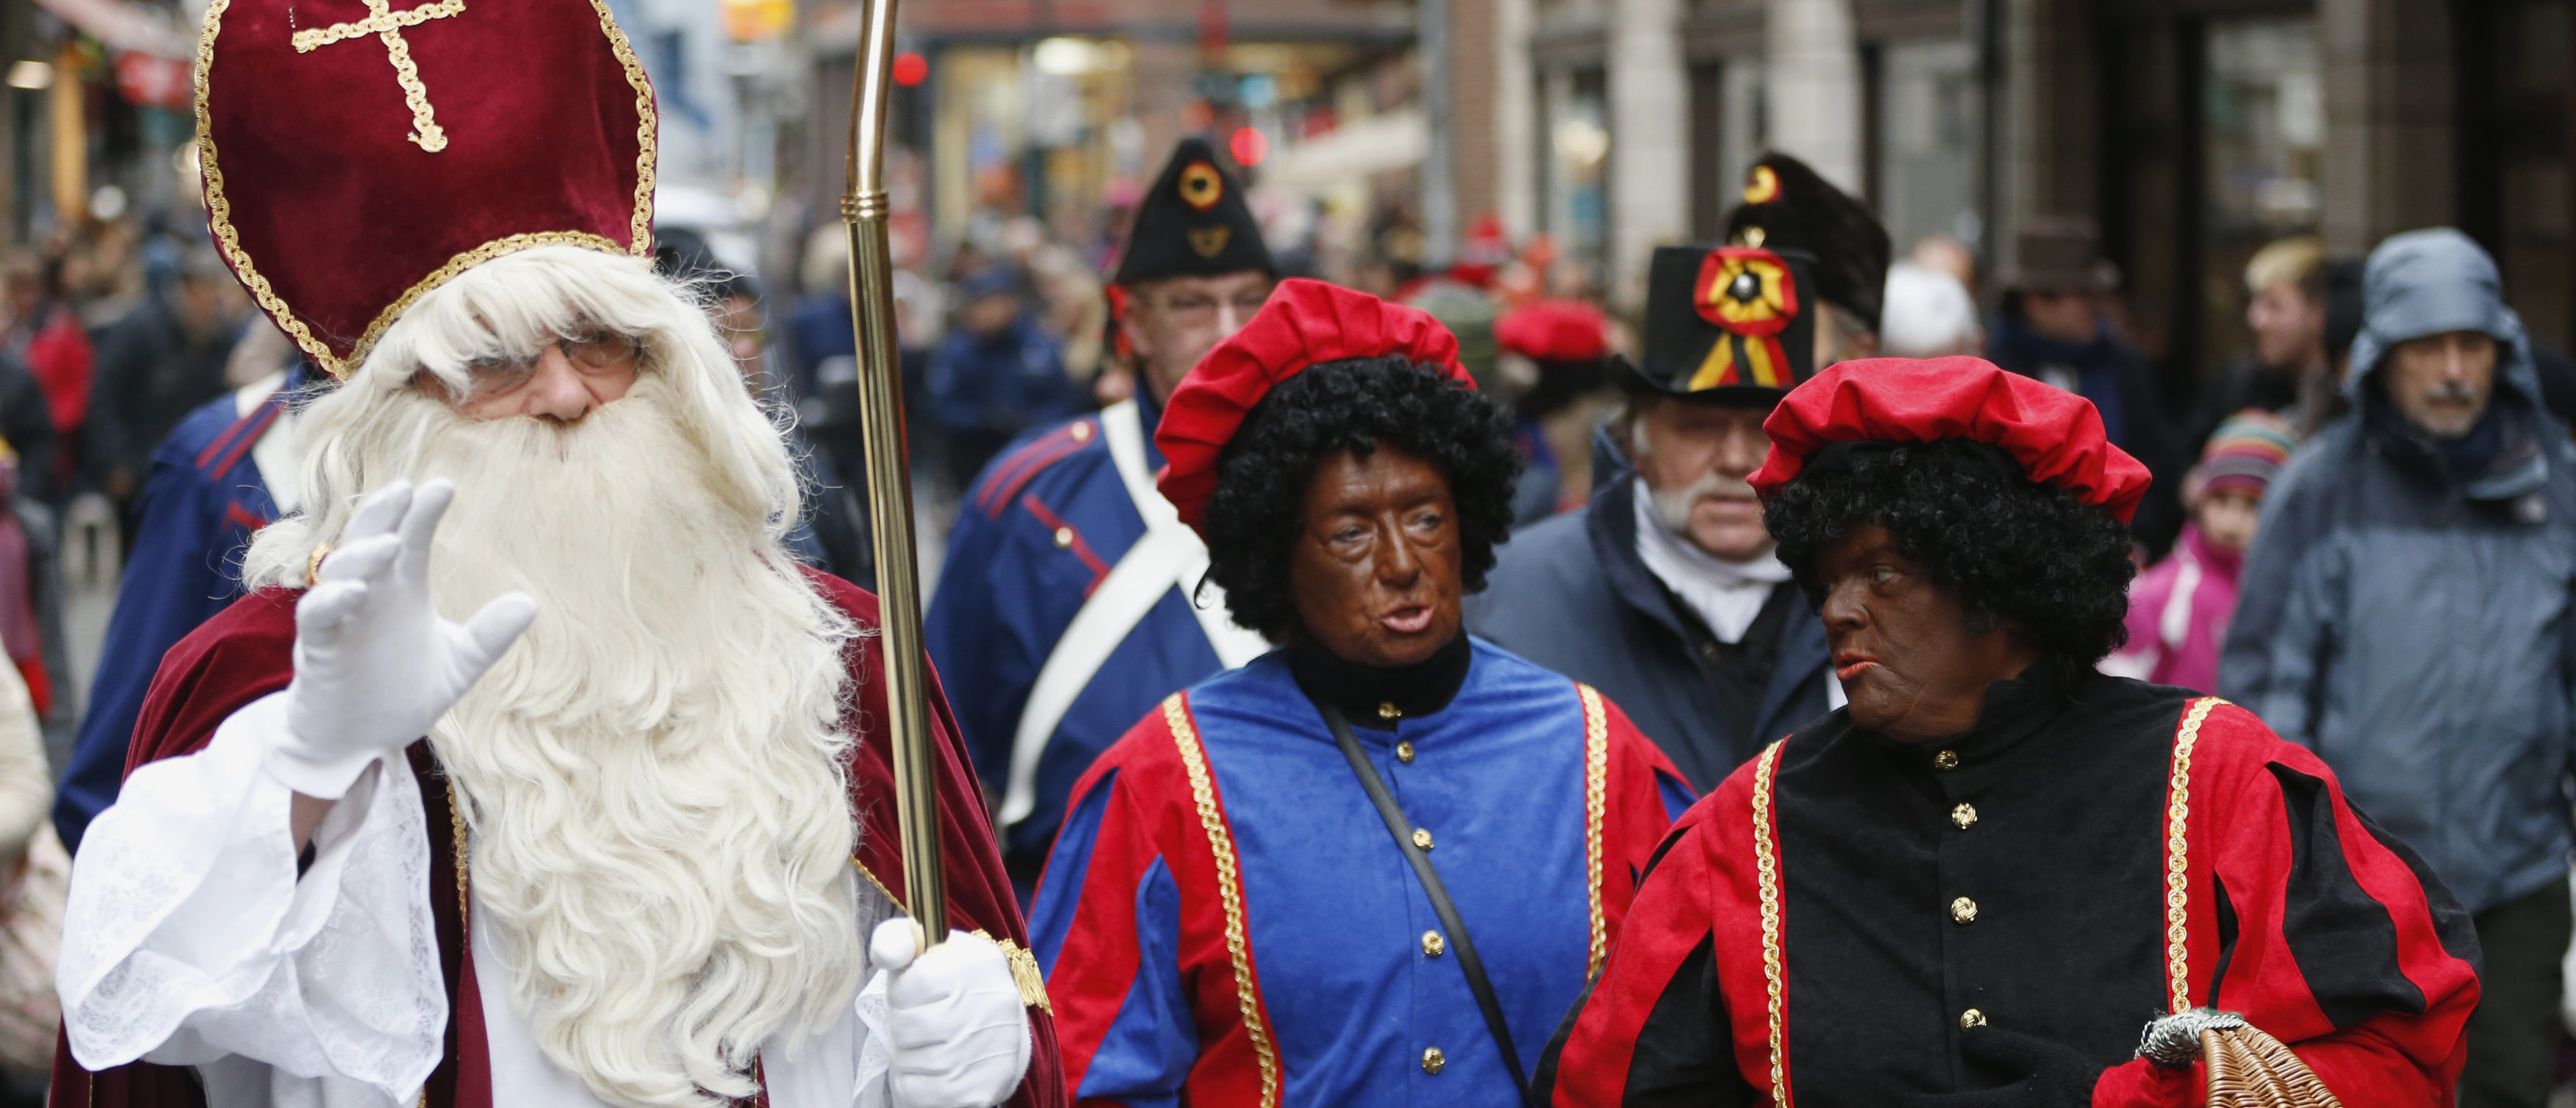 Saint Nicholas (L) is followed by his two assistants called "Zwarte Piet" (Black Pete) during a traditional parade in central Brussels December 1, 2012. The Netherlands and Belgium are two countries that pride themselves on progressive laws and open societies, but critics say they are stuck in the dark ages when it comes to depictions of Santa Claus and his helpers. Saint Nicholas, or "Sinterklaas" in Dutch, brings presents to children on December 5 in the Netherlands and on December 6 in Belgium, and is always accompanied by at least one assistant dressed in 17th century costume who has a blackened face. Picture taken December 1, 2012. REUTERS/Francois Lenoir (BELGIUM - Tags: ENTERTAINMENT RELIGION SOCIETY) - GM1E8C31KJF01